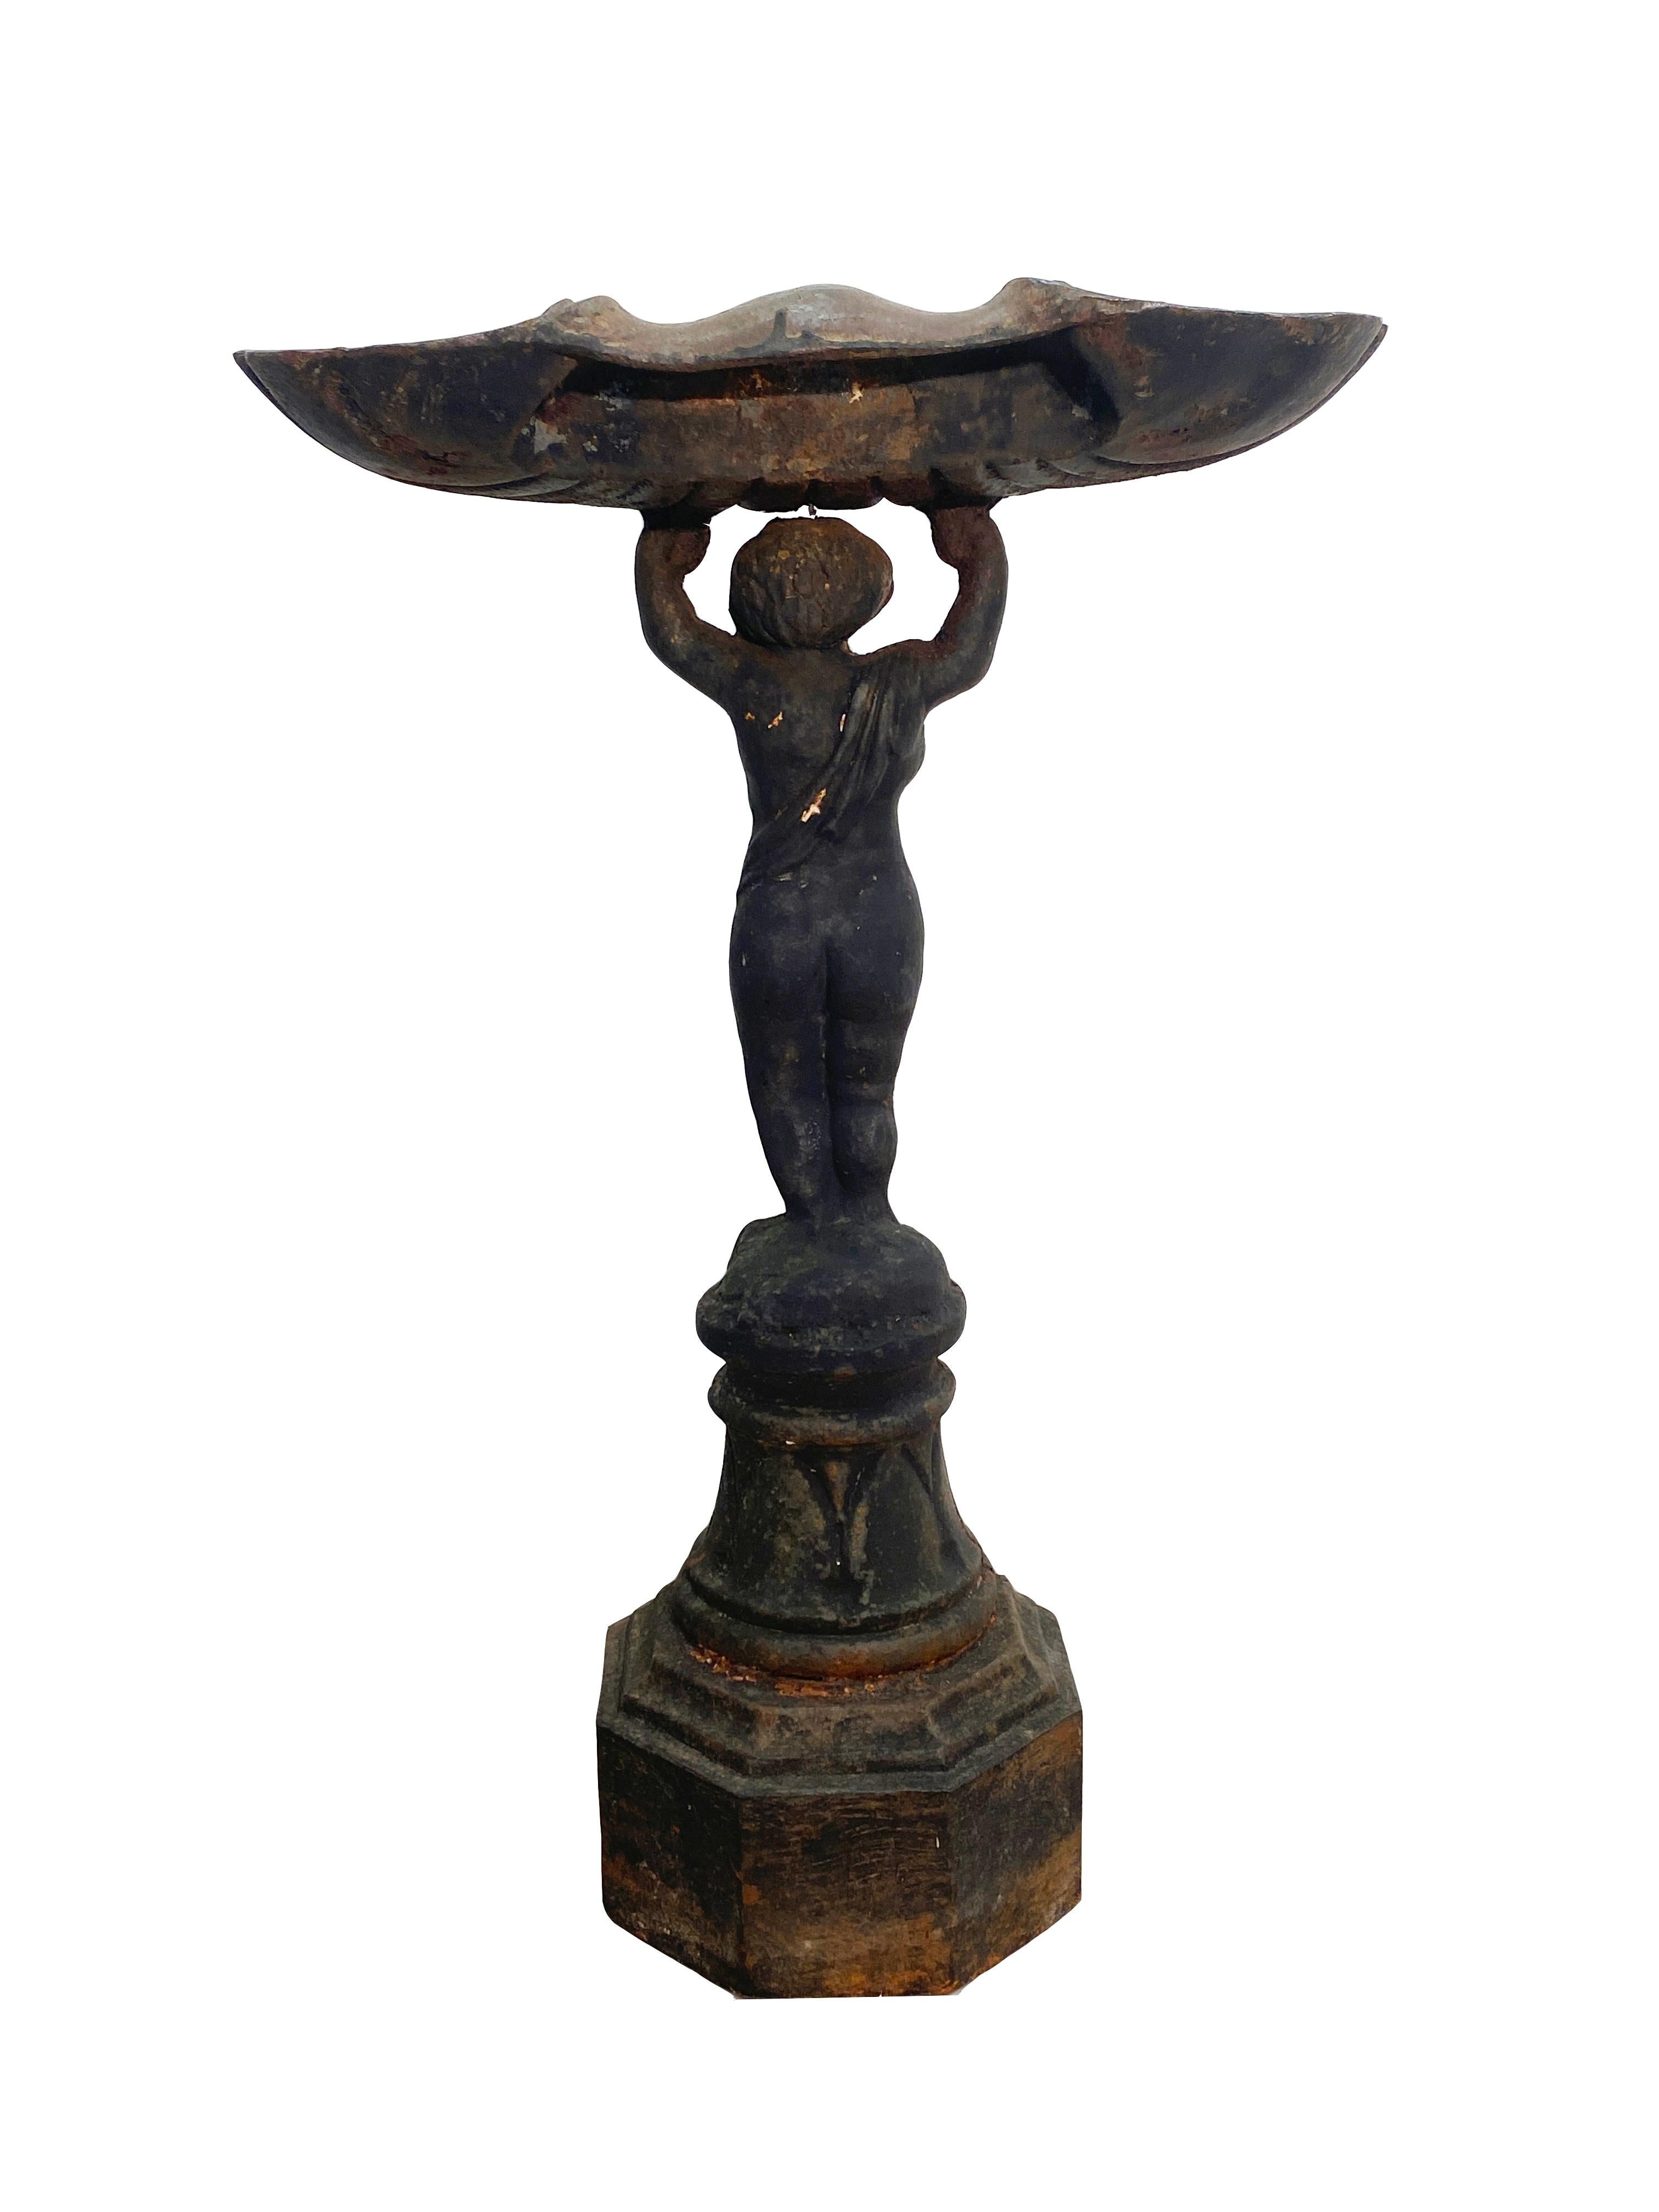 Late 19th century heavy patinated cast iron bird bath in New Classical style. Cherub standing atop an octagonal base raising a shell form basin.